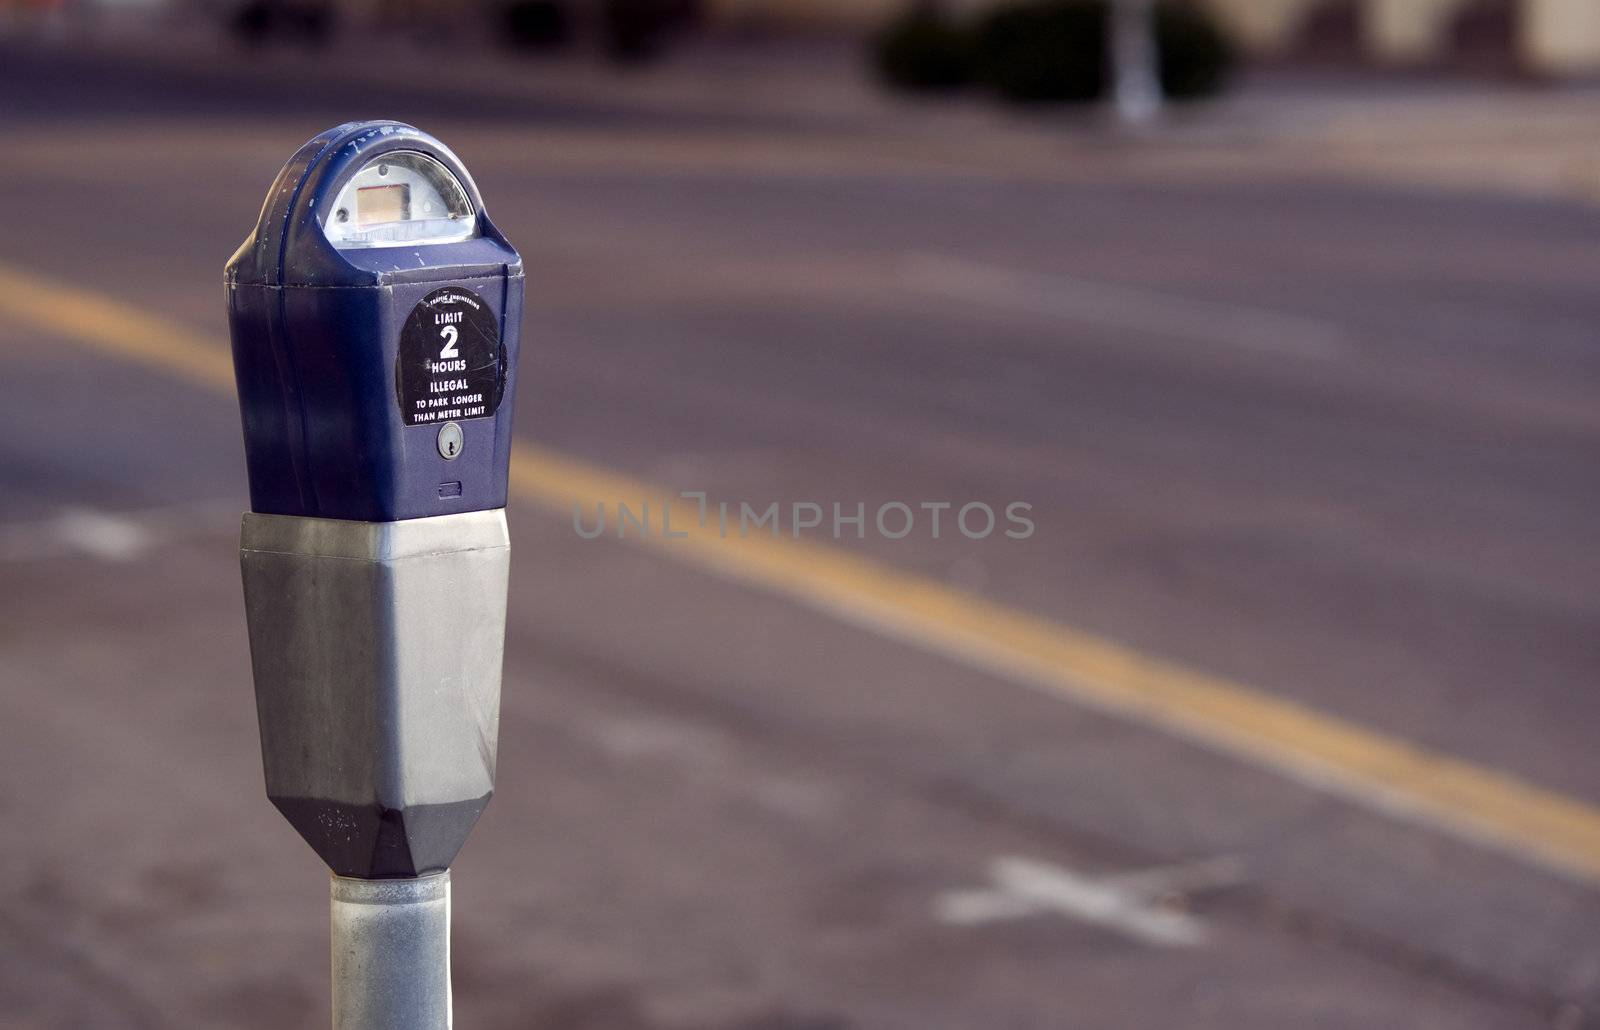 Parking Meter by ChrisBoswell